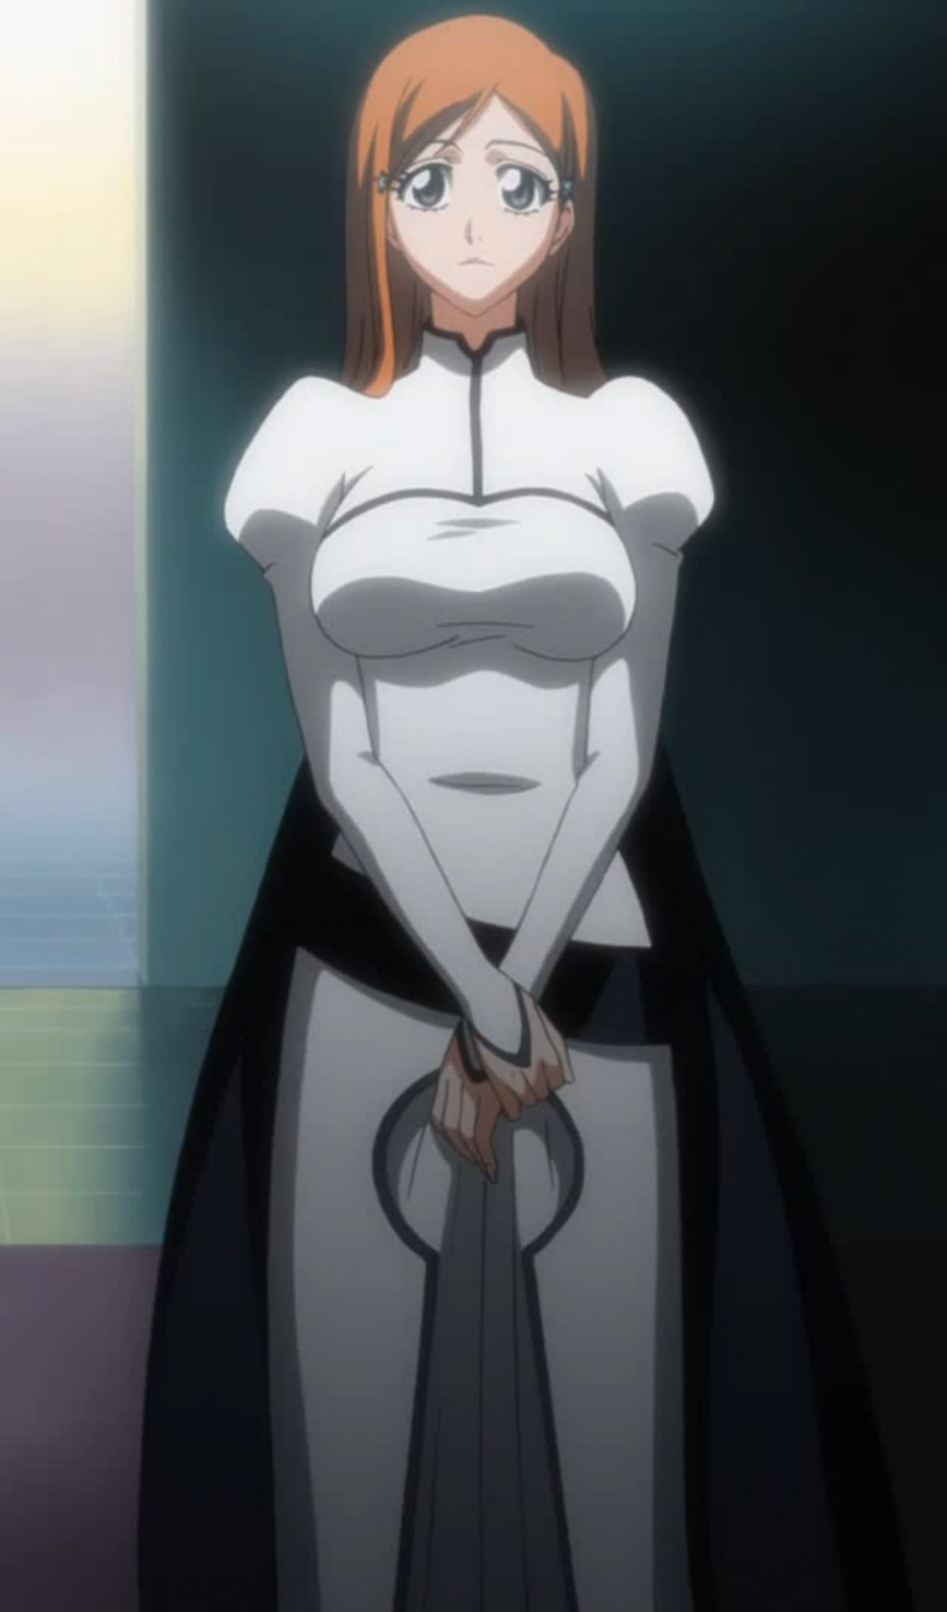 Orihime Inoue is MORE IMPORTANT Than You Think – The Official